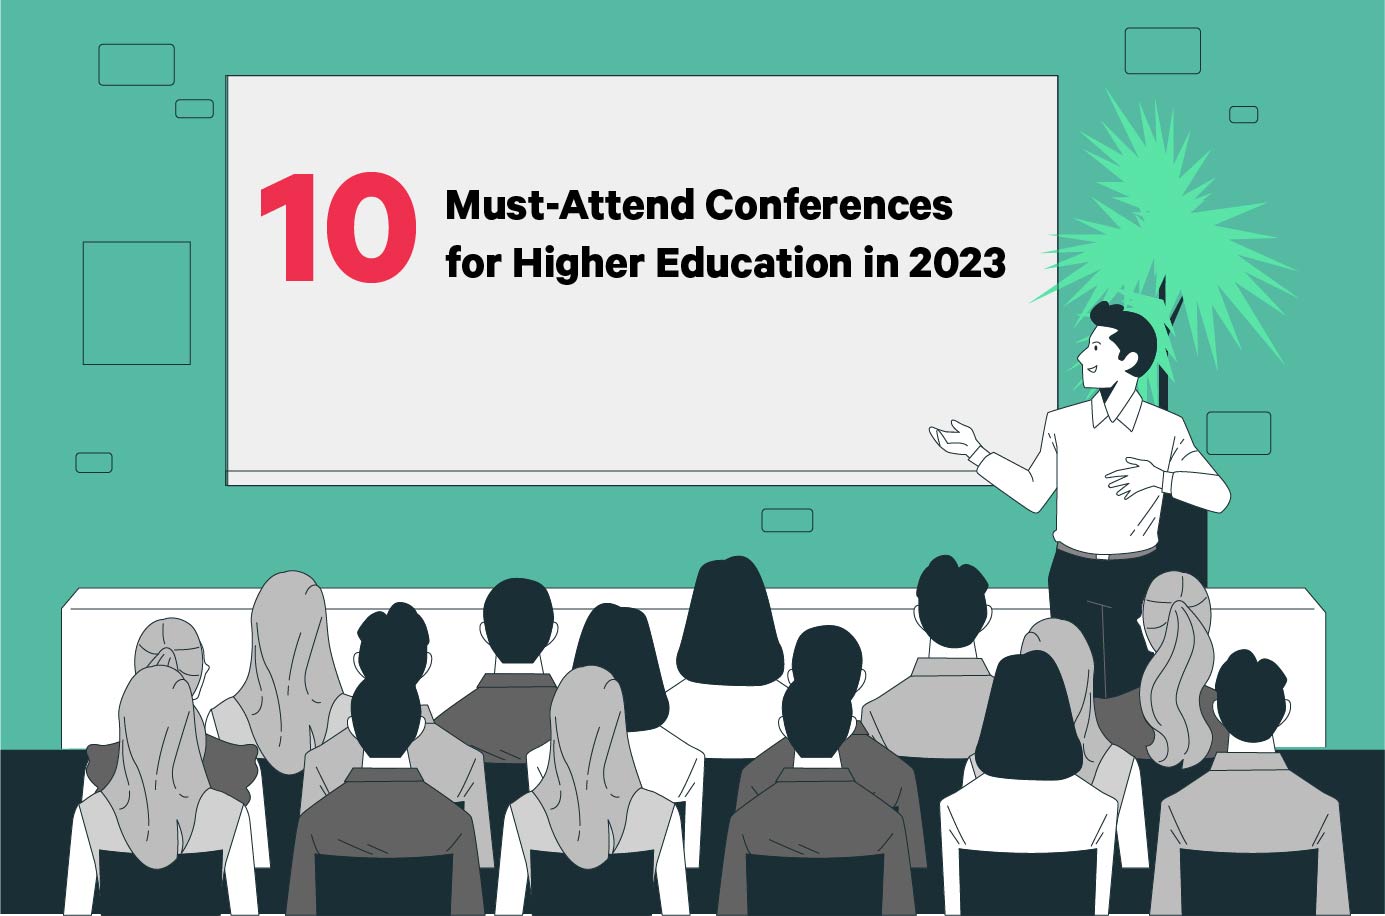 10 Higher Education Conferences You Must Attend in 2023